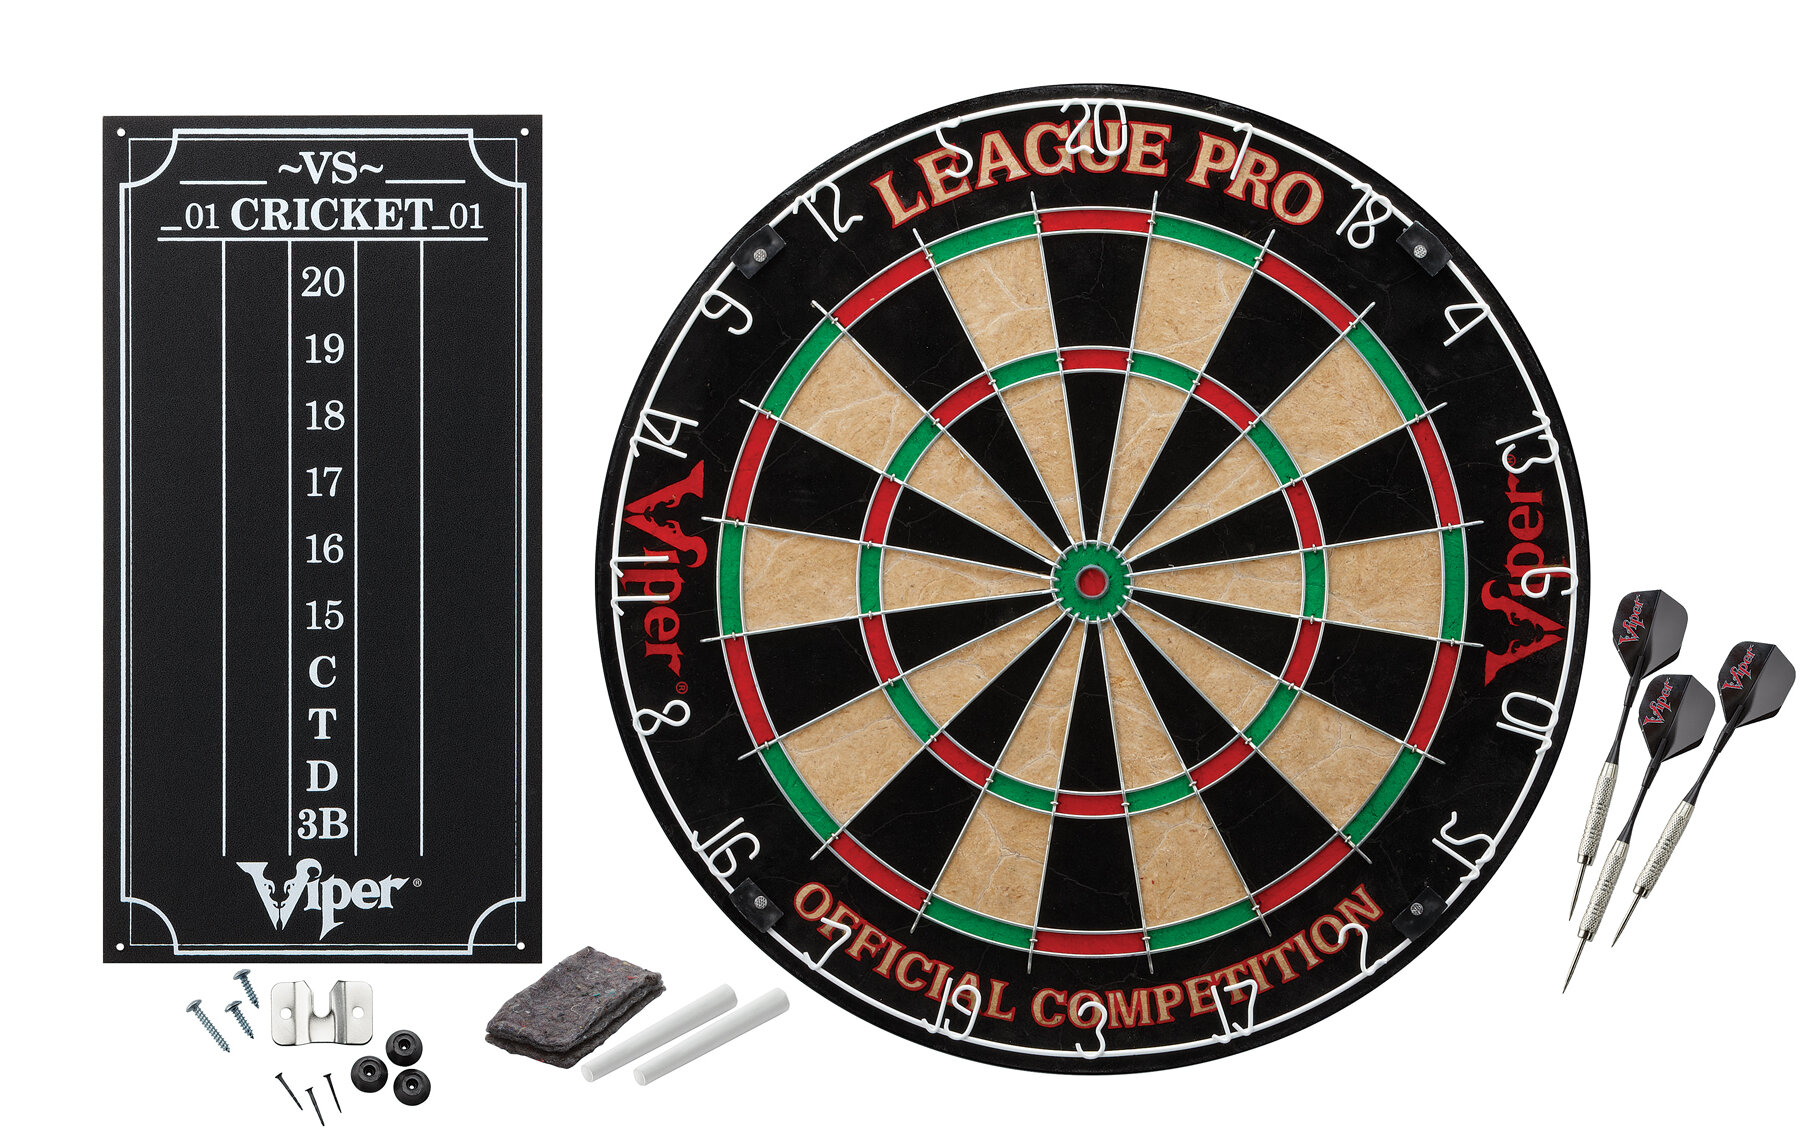 ideal league’s Dart board light kit tournaments or practice,y Traditional 